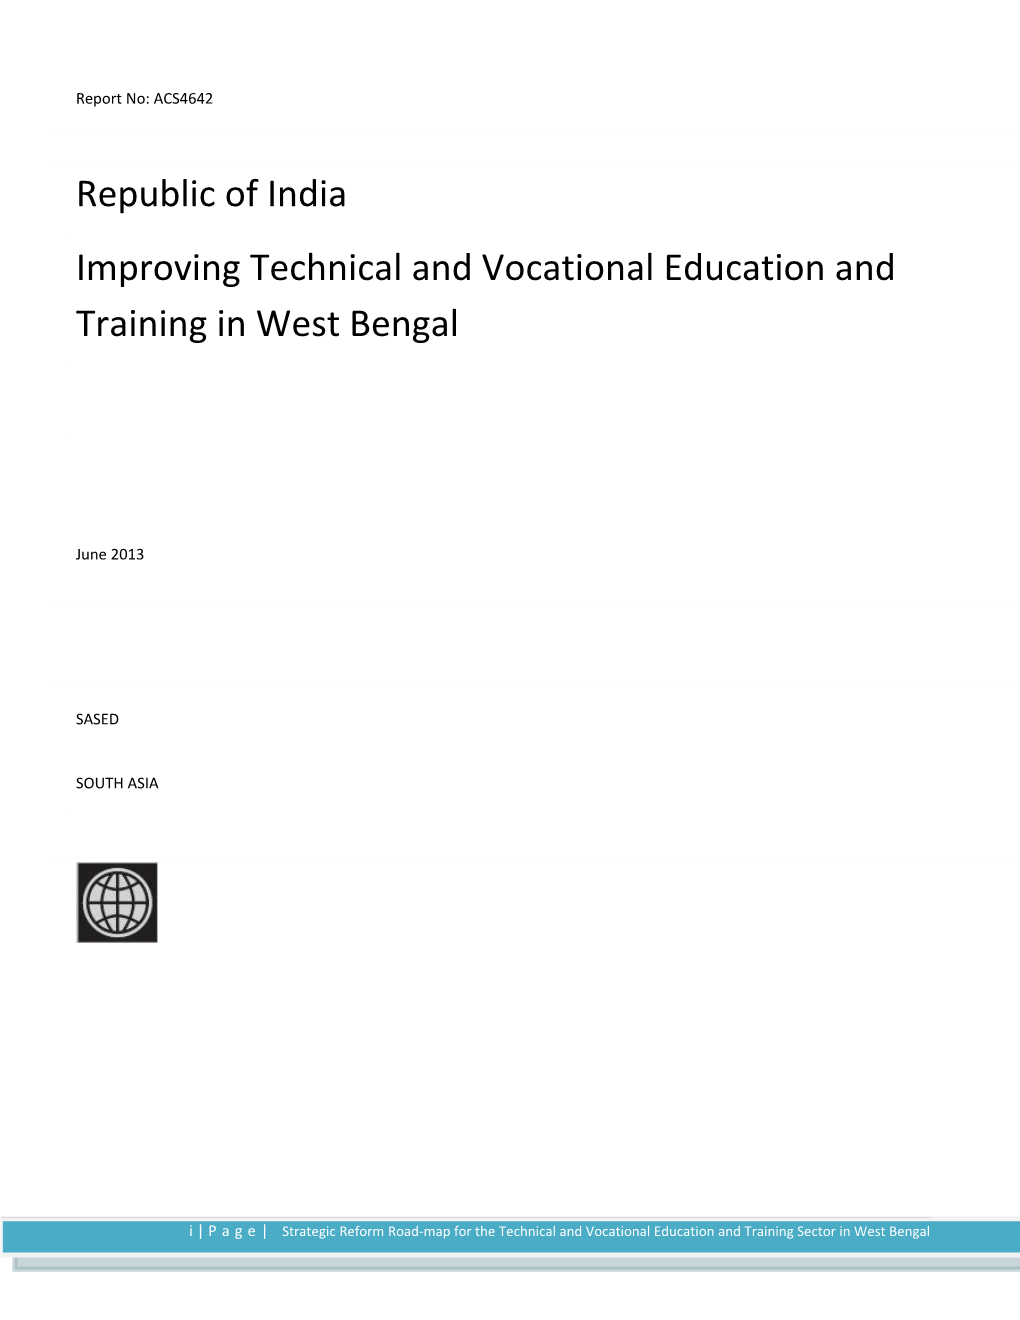 Improving Technical and Vocational Education and Training in West Bengal